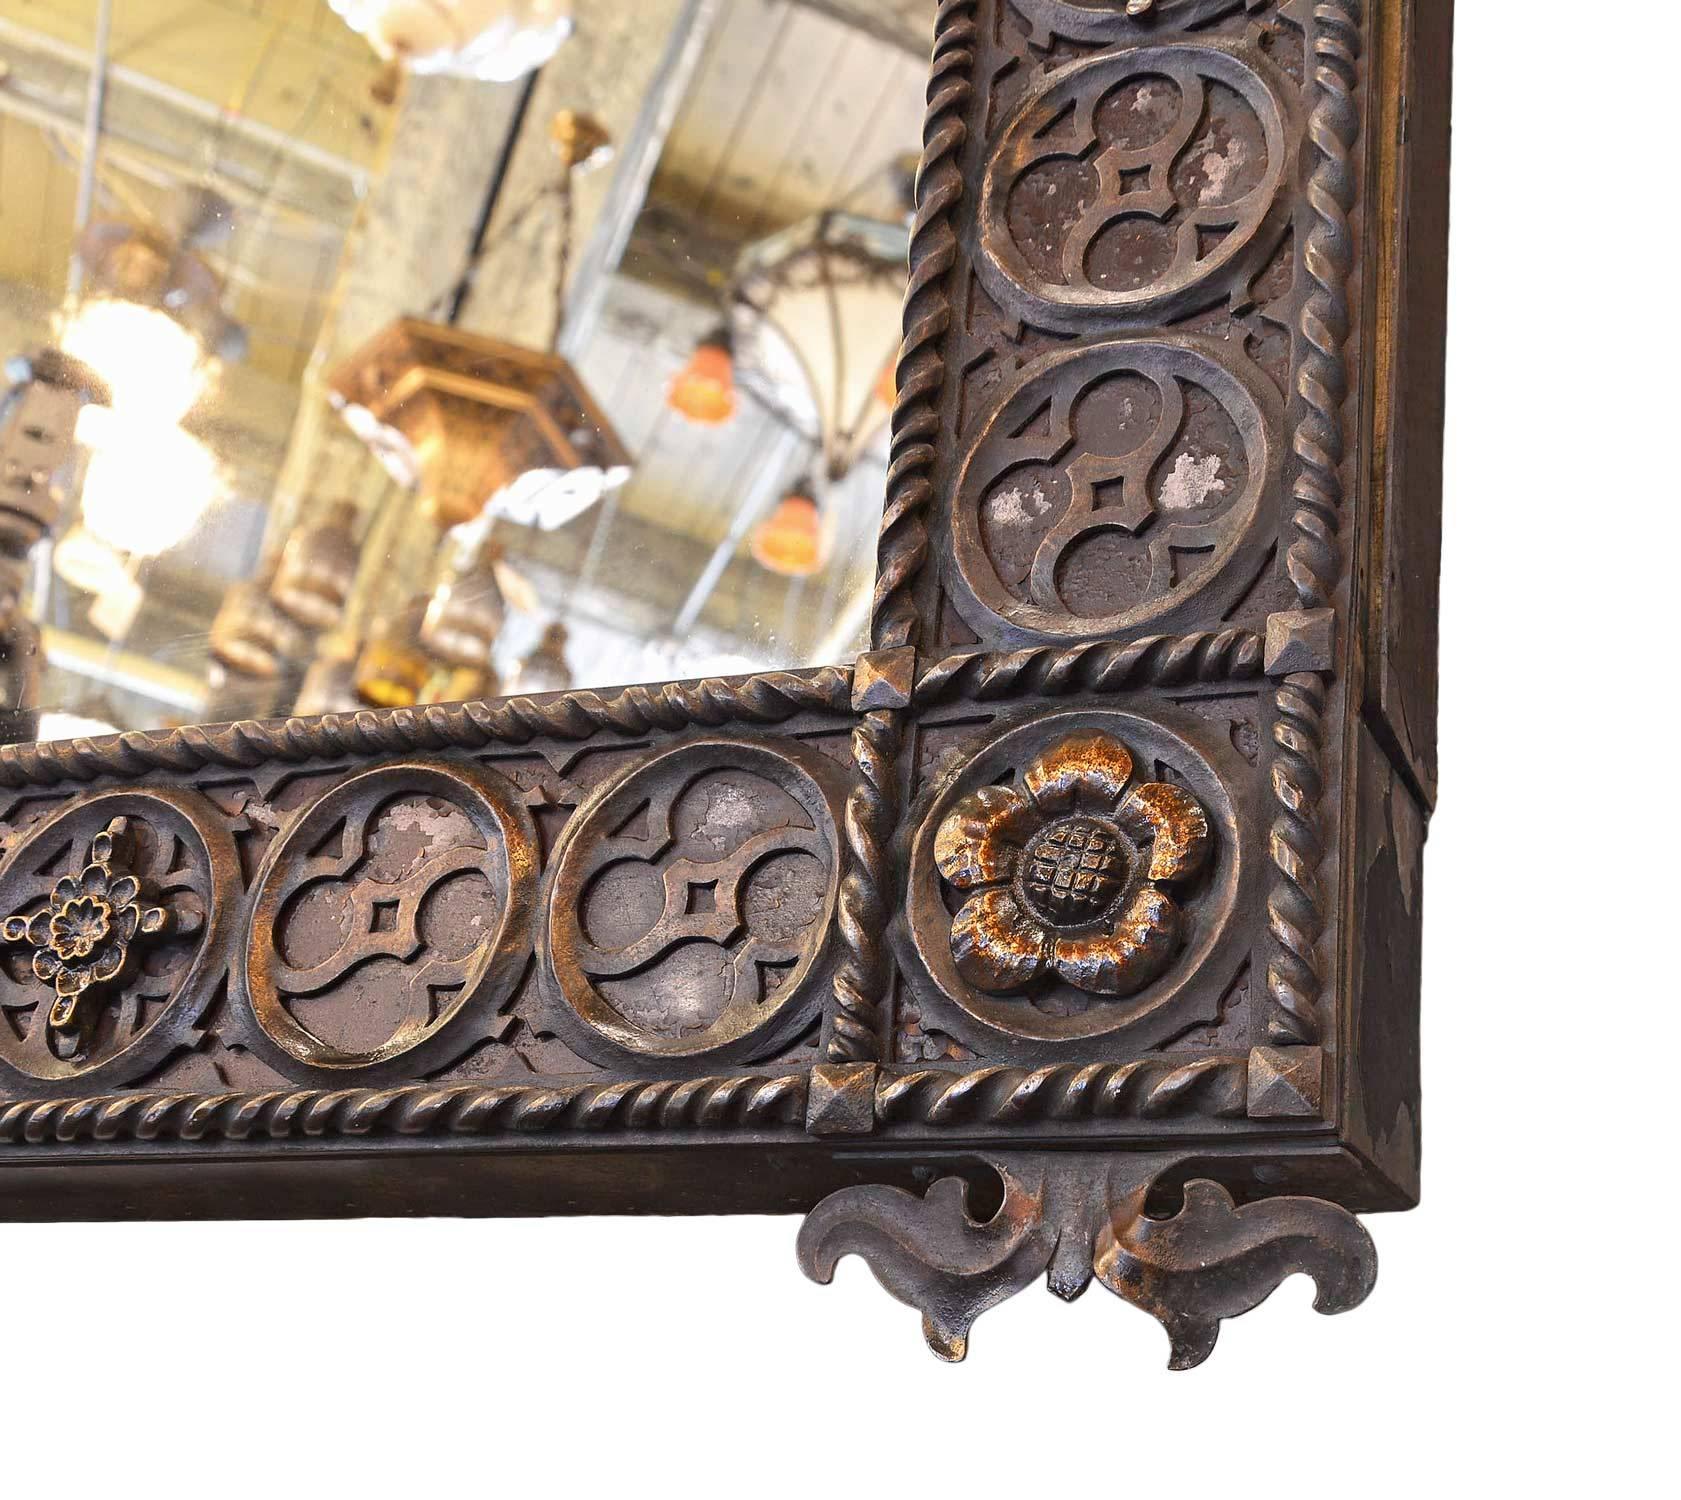 Made by the Frink Corporation of New York, this mirror has a highly decorative iron frame with floral medallions and details that harnesses light to illuminate the reflection. From 1887, I.P. Frink  was revered as ‘among the greatest lighting